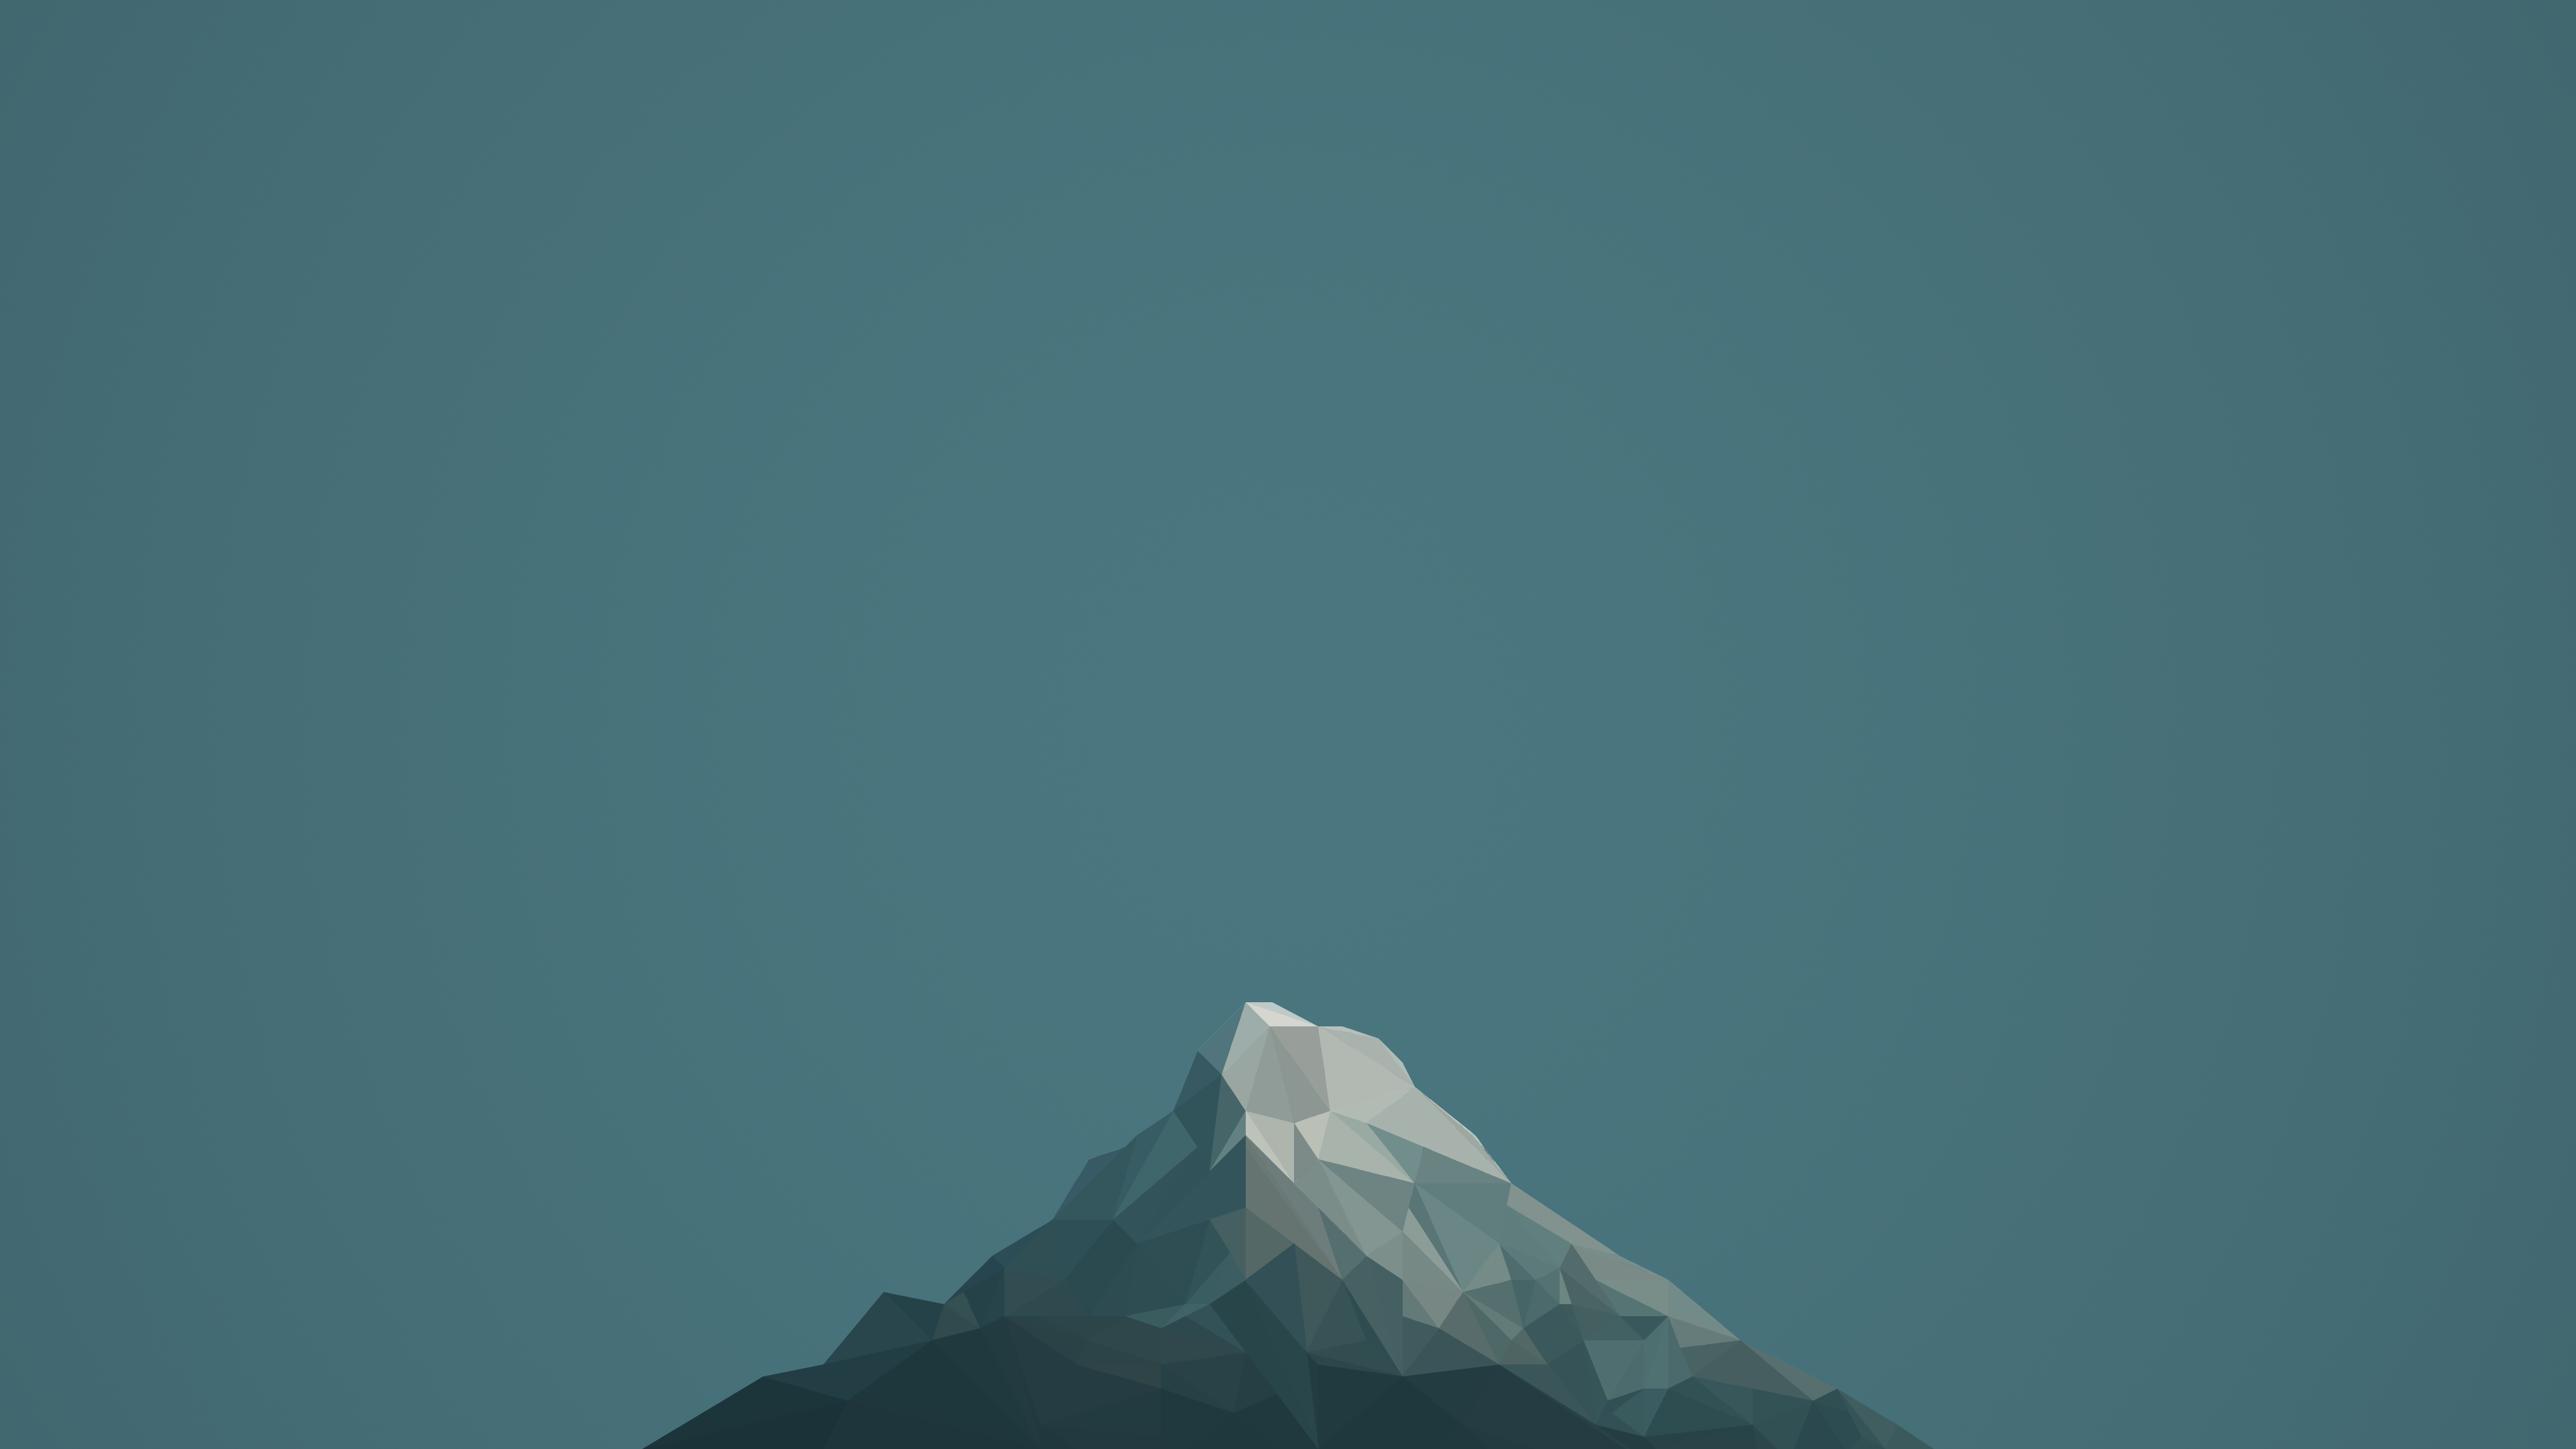 Low Poly Mountain by Photosoups on DeviantArt